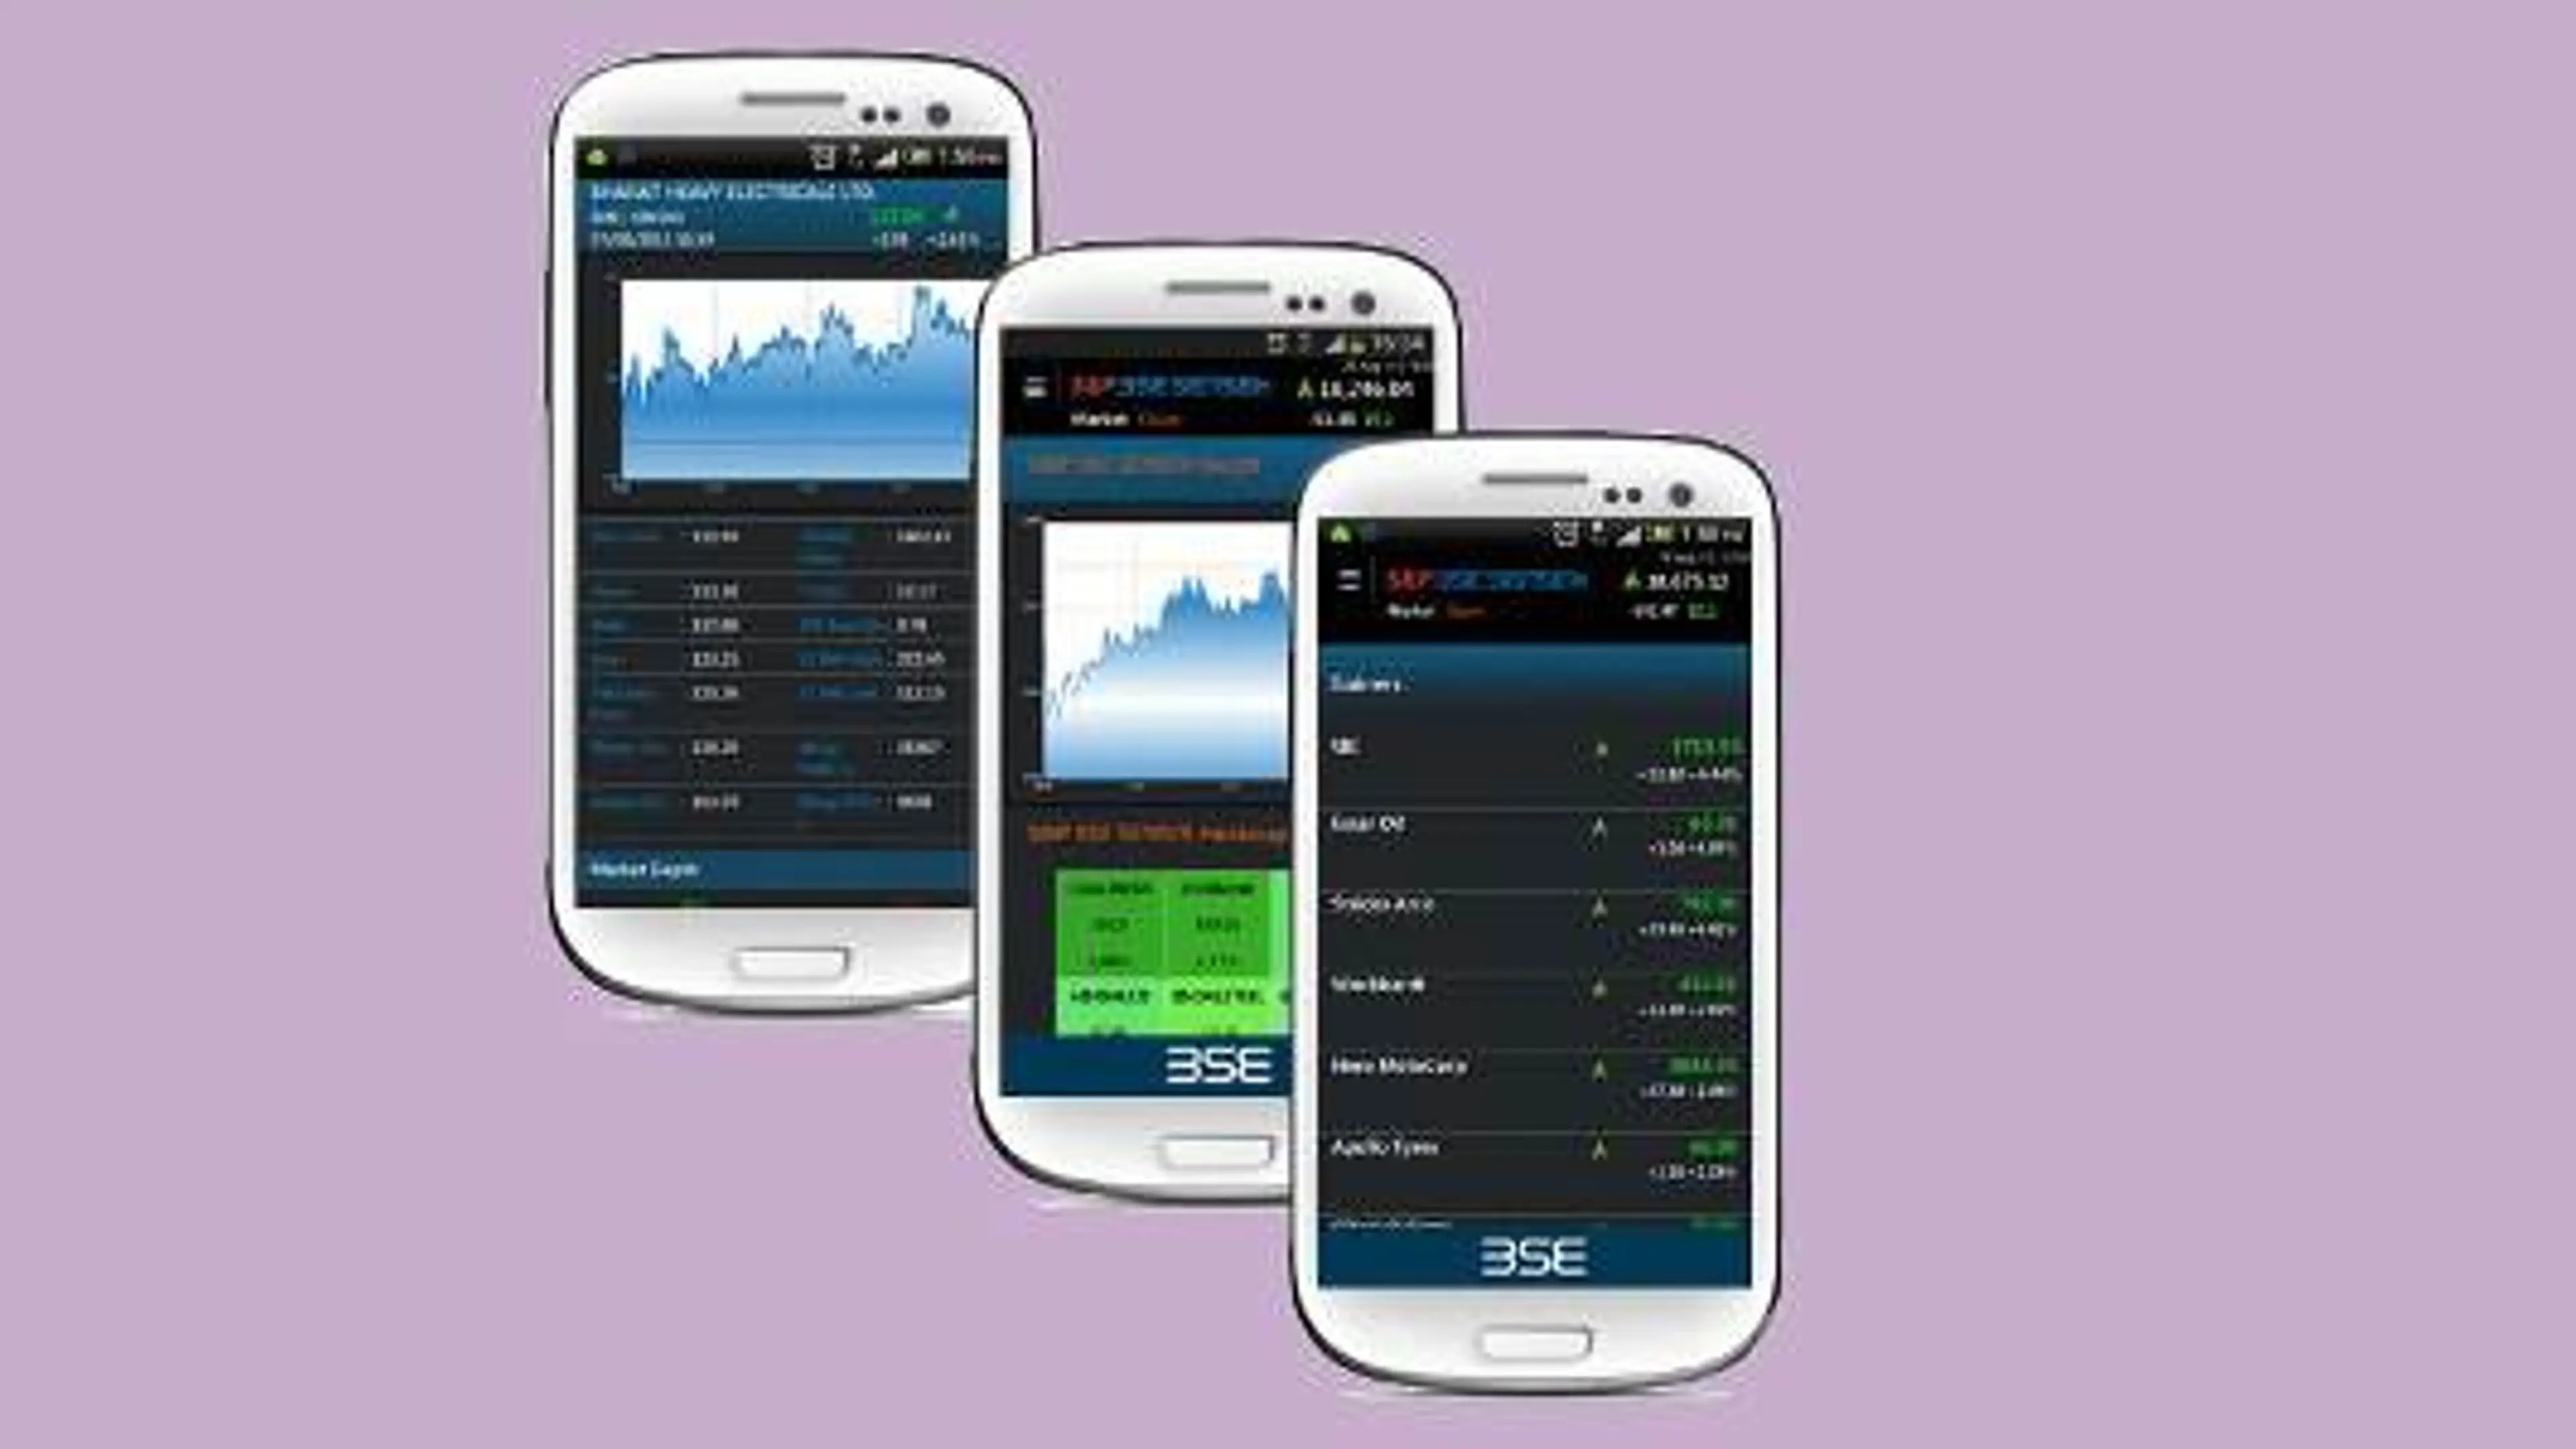 BSE launches the official smartphone apps for Android and Windows